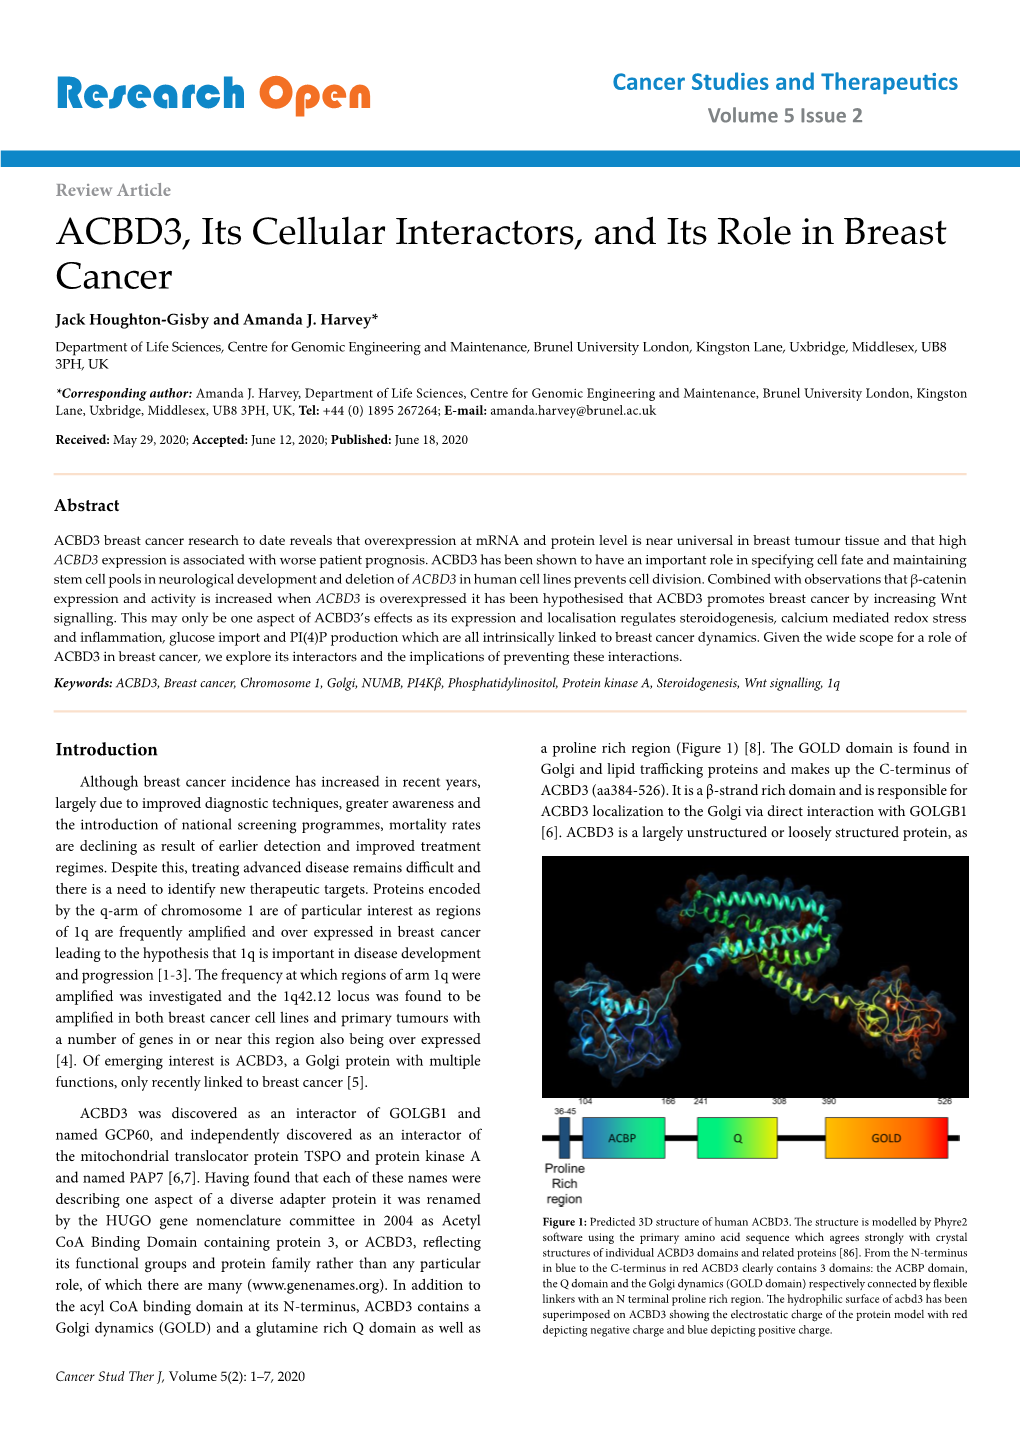 ACBD3, Its Cellular Interactors, and Its Role in Breast Cancer Jack Houghton-Gisby and Amanda J